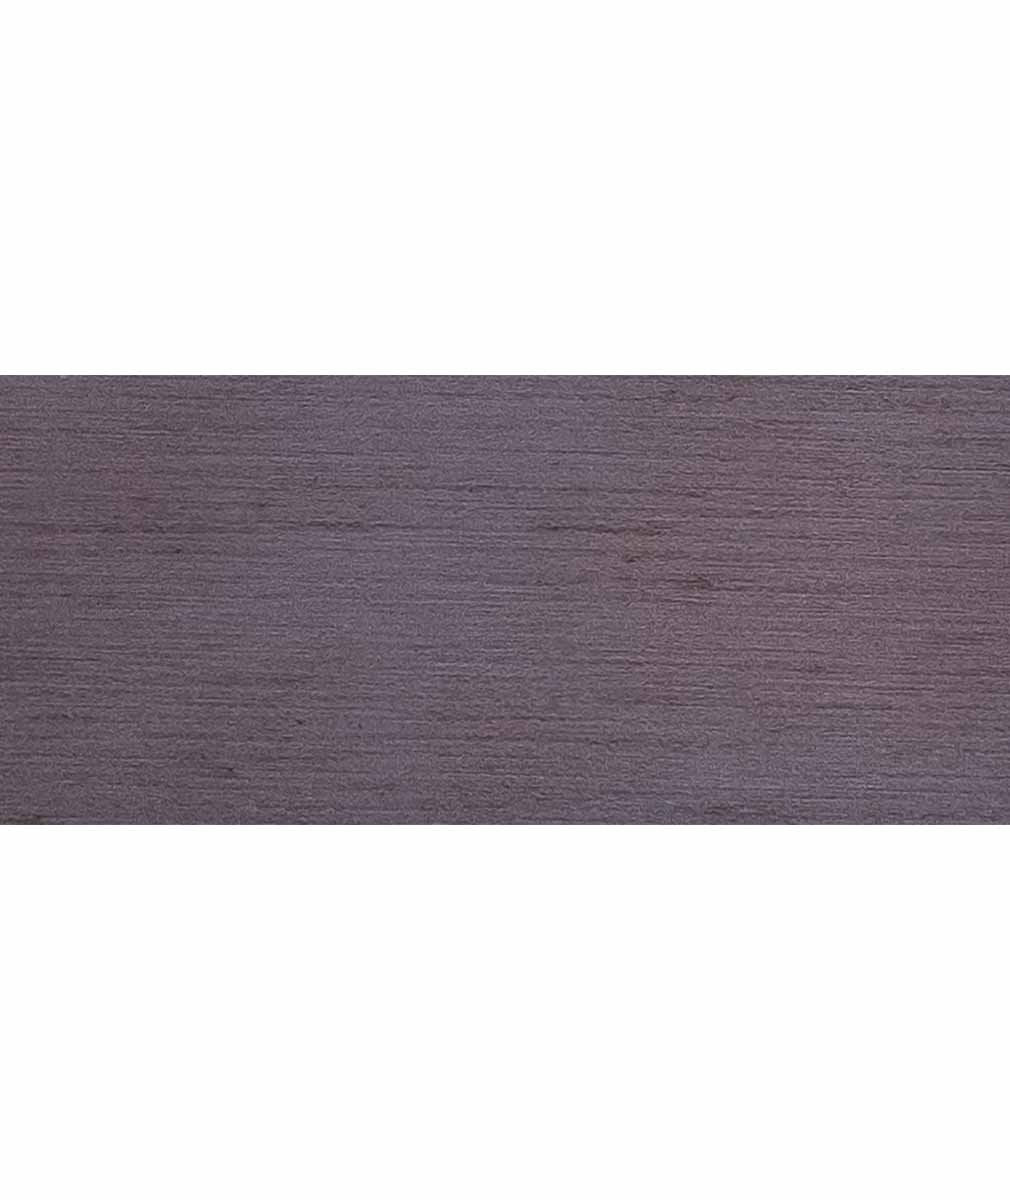 Shop Benjamin Moore&#39;s Stonehedge Arborcoat Semi-Solid Stain  from JC Licht